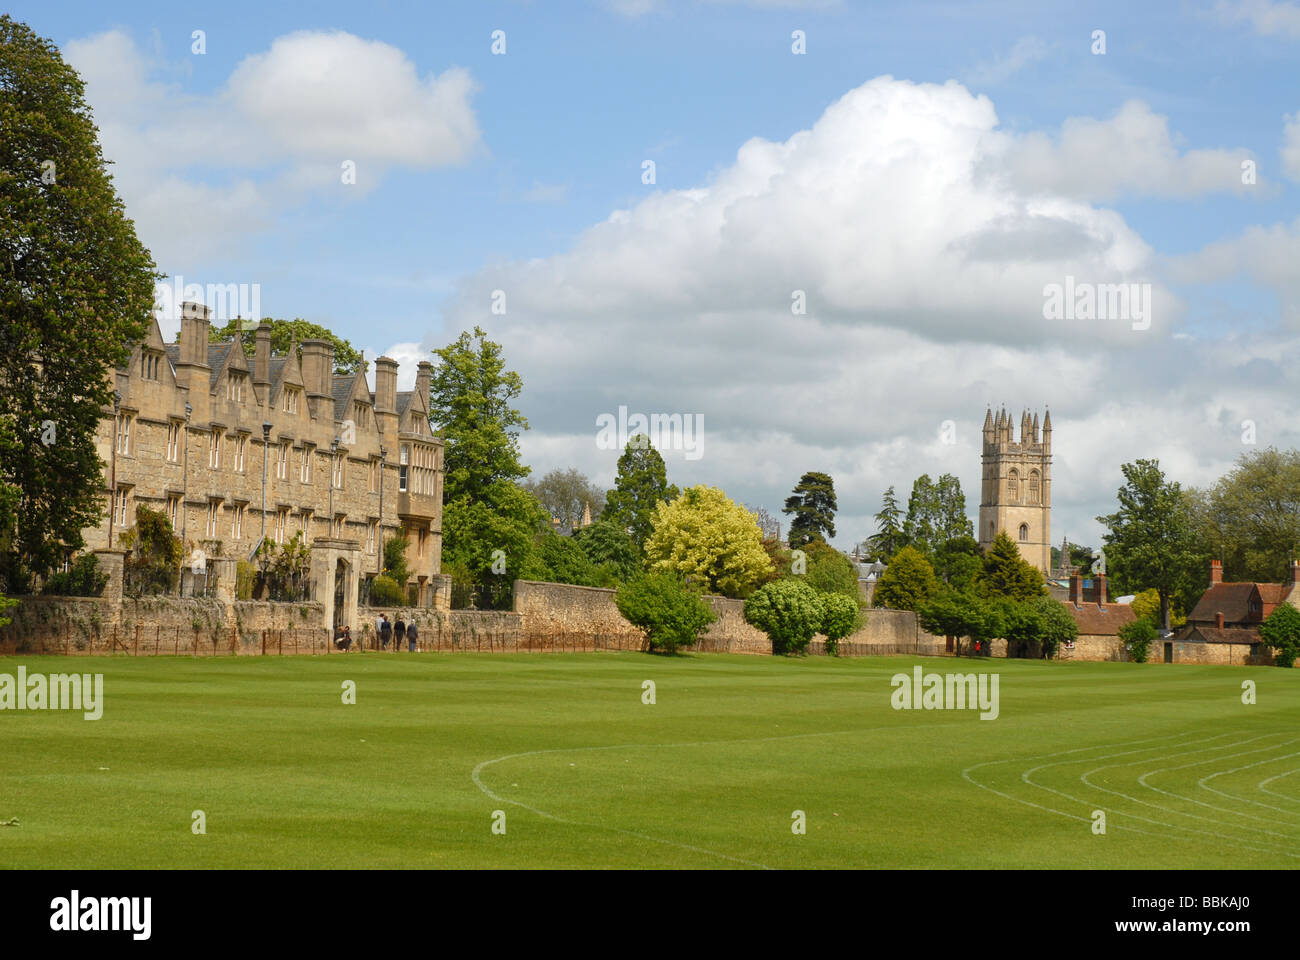 view across Merton Field to Merton College & Magdalen Tower, Oxford Univeristy, Oxford, Oxofordshire, England Stock Photo